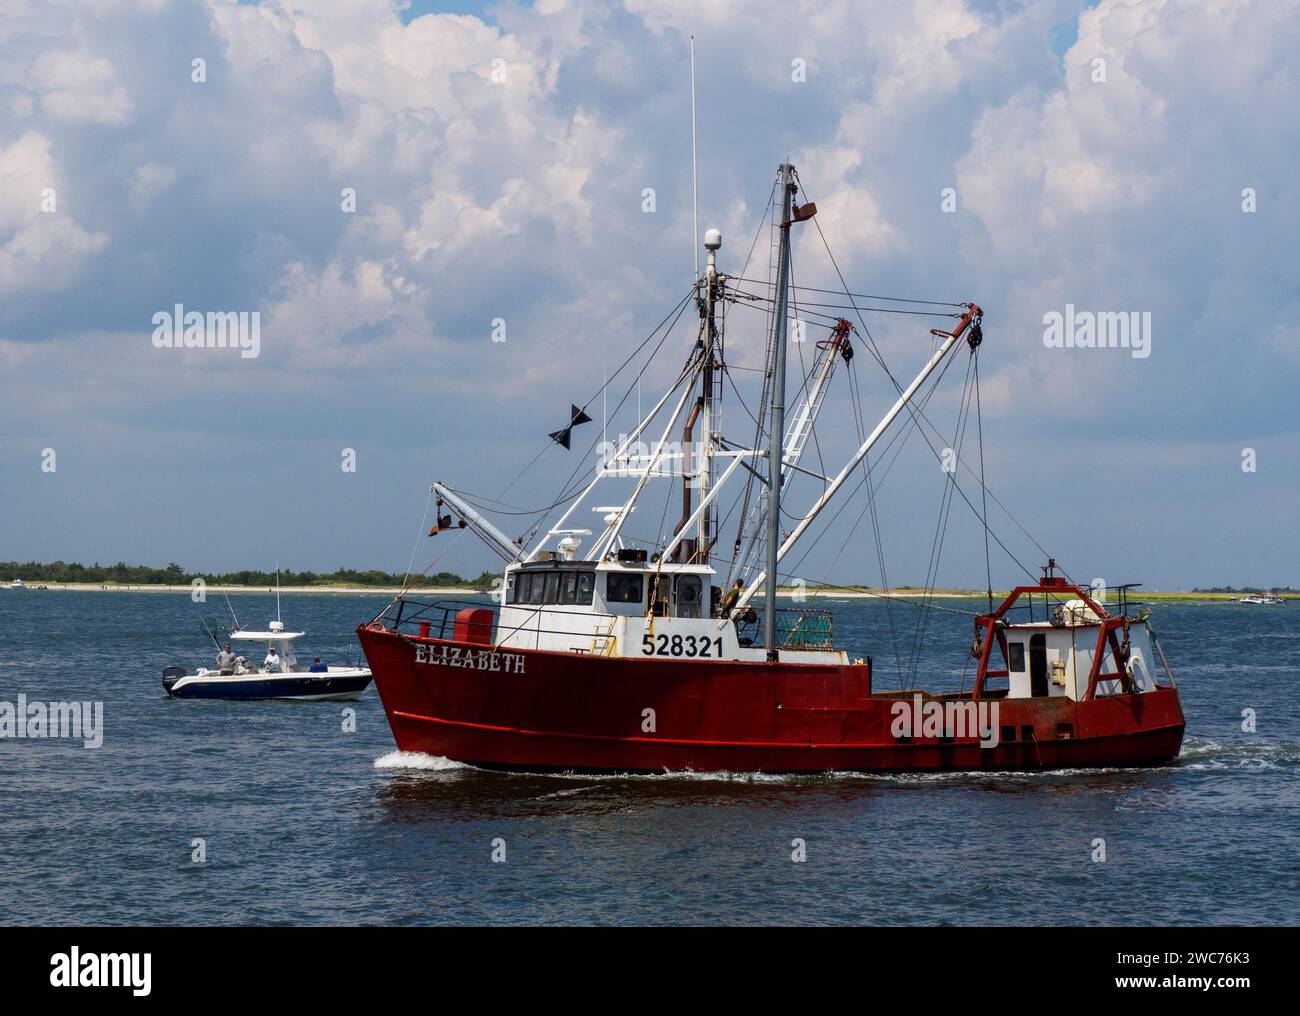 A vibrant red fishing boat gracefully glides along the calm waters of a picturesque river Stock Photo